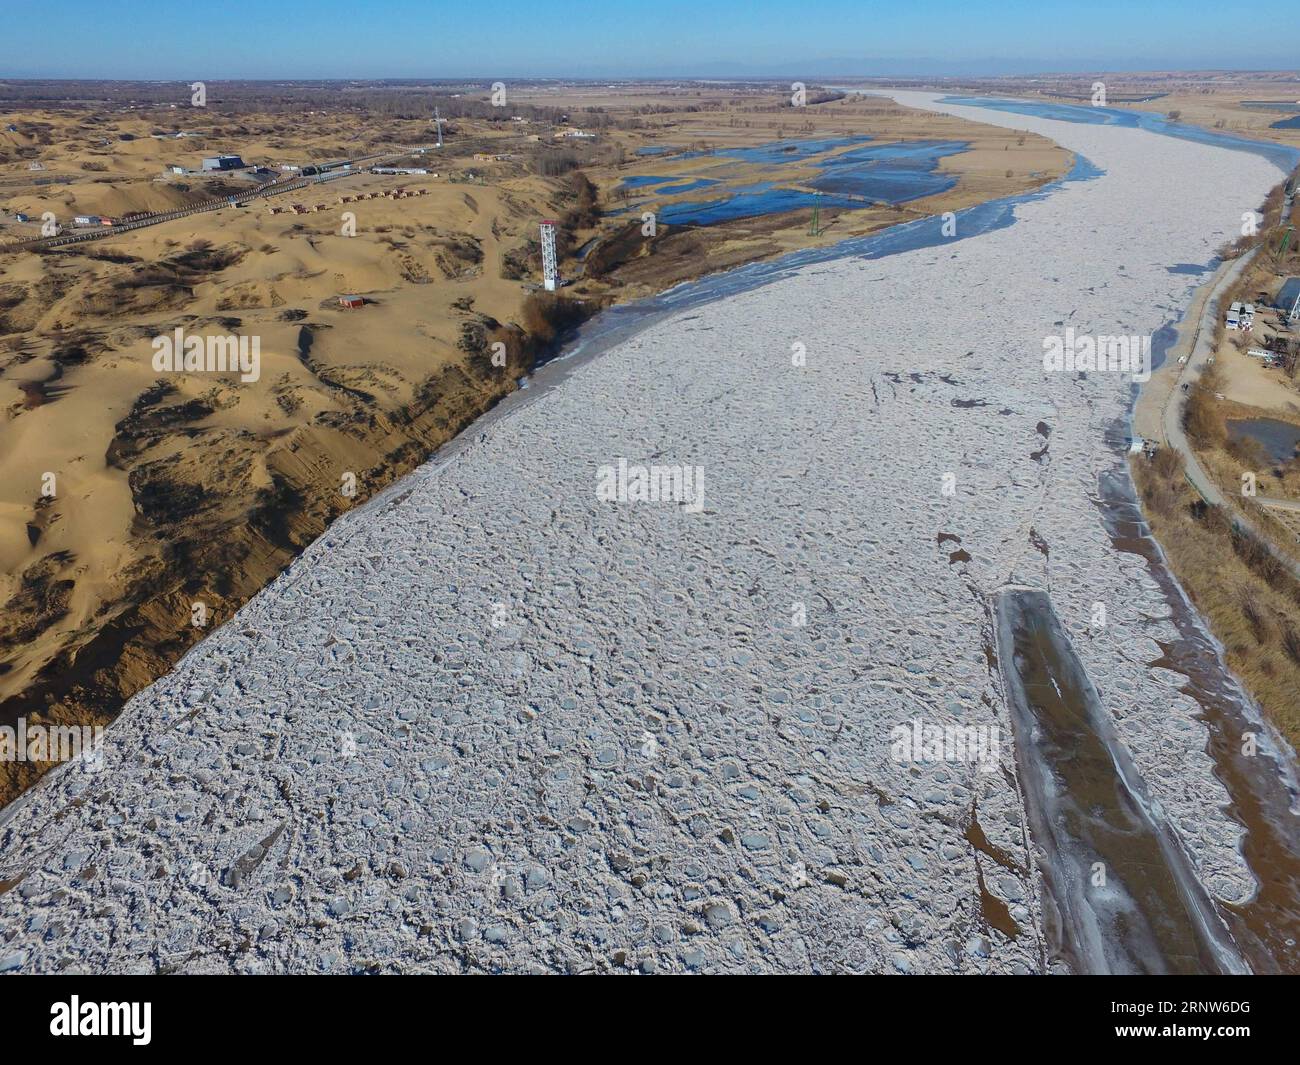 (171205) -- HOHHOT, Dec. 5, 2017 -- Photo taken on Dec. 5, 2017 shows the frozen Yellow River at Togtoh section in north China s Inner Mongolia Autonomous Region. The length of frozen section of the Yellow River in Inner Mongolia has reached 139 kilometers by 4:00 p.m. Tuesday. The Yellow River Flood Control and Drought Relief Headquarters announced the beginning of the river s freeze-up period Monday. )(mcg) CHINA-YELLOW RIVER-FREEZE-UP PERIOD (CN) DengxHua PUBLICATIONxNOTxINxCHN Stock Photo